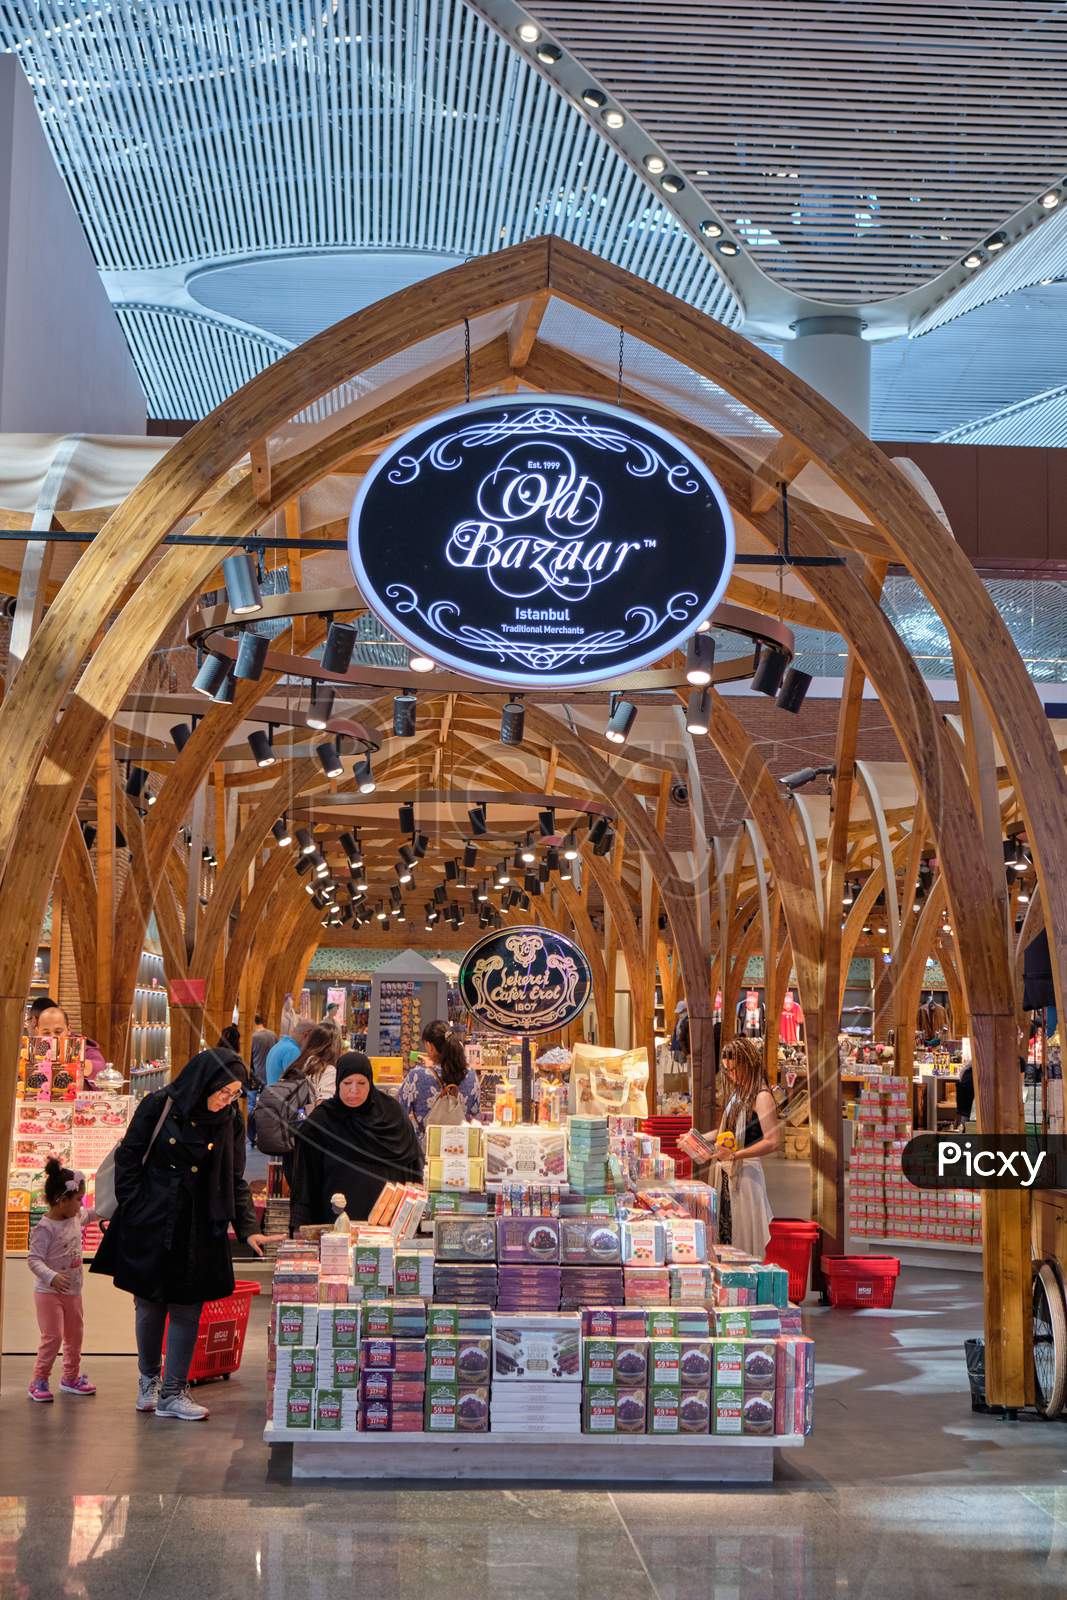 Duty Free Shops At Istanbul Airport’S International Departures Terminal, Istanbul Havalimani, Turkey